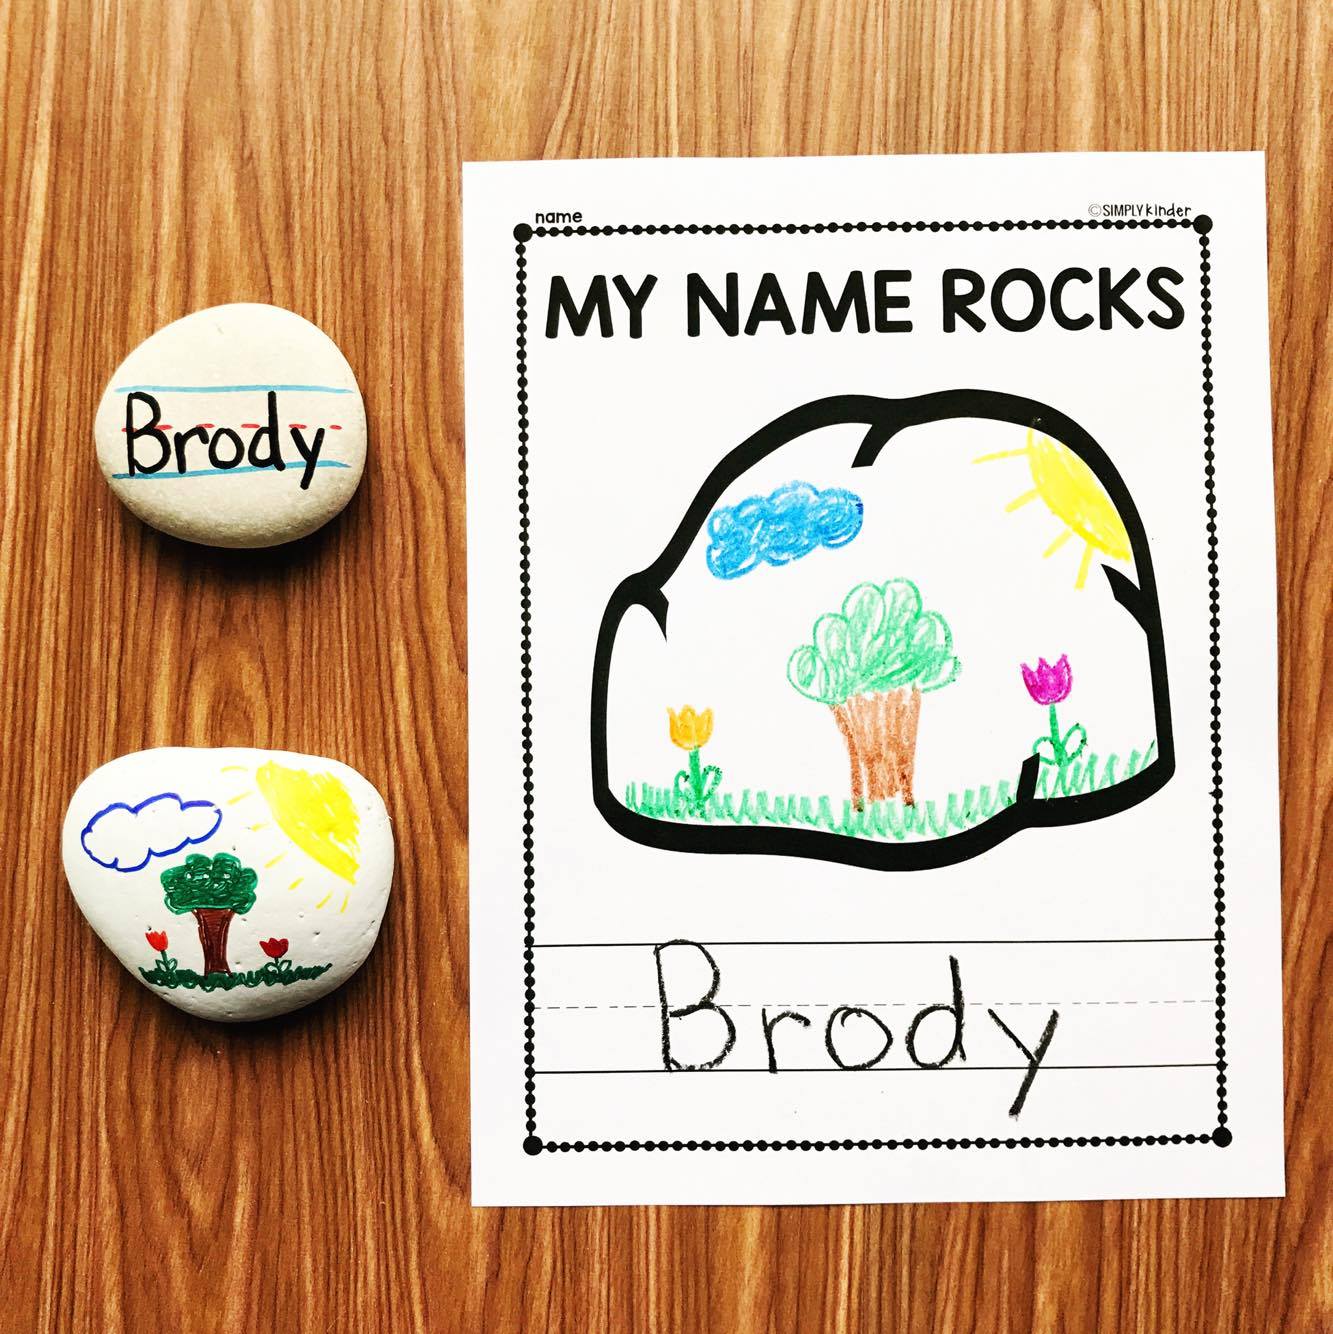 Name Rocks - Make these fun name rocks for your students to use in a writing center! Students will have a perfect model of who to write their name on one side and can illustrate the other side! Simply Kinder shares how we made them, what we learned doing them with first graders, and free printables to use them in centers!